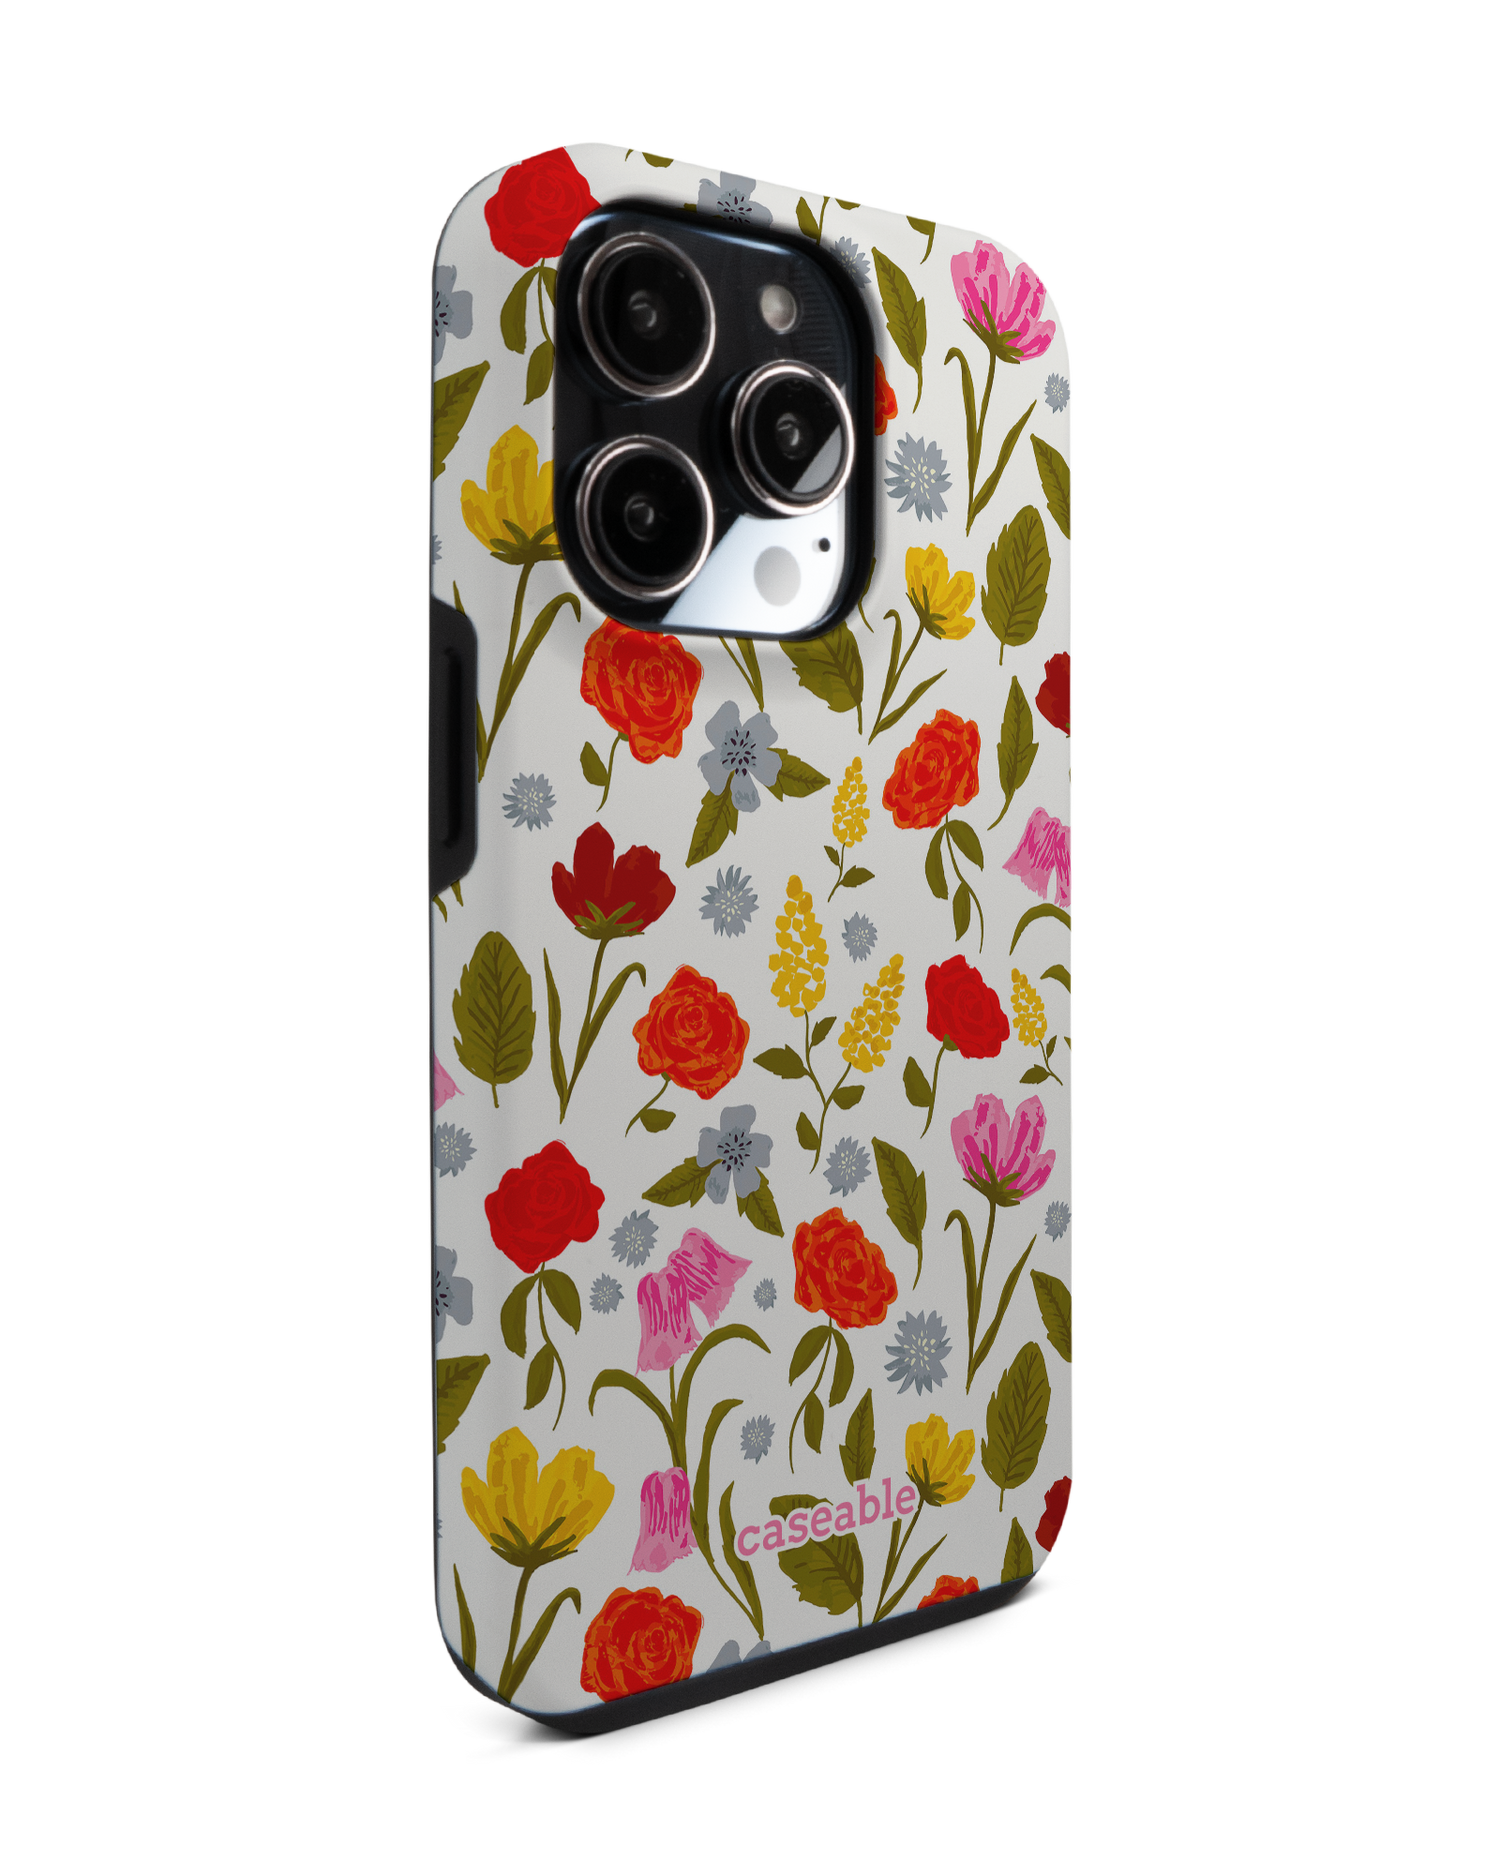 Botanical Beauties Premium Phone Case for Apple iPhone 14 Pro: View from the left side